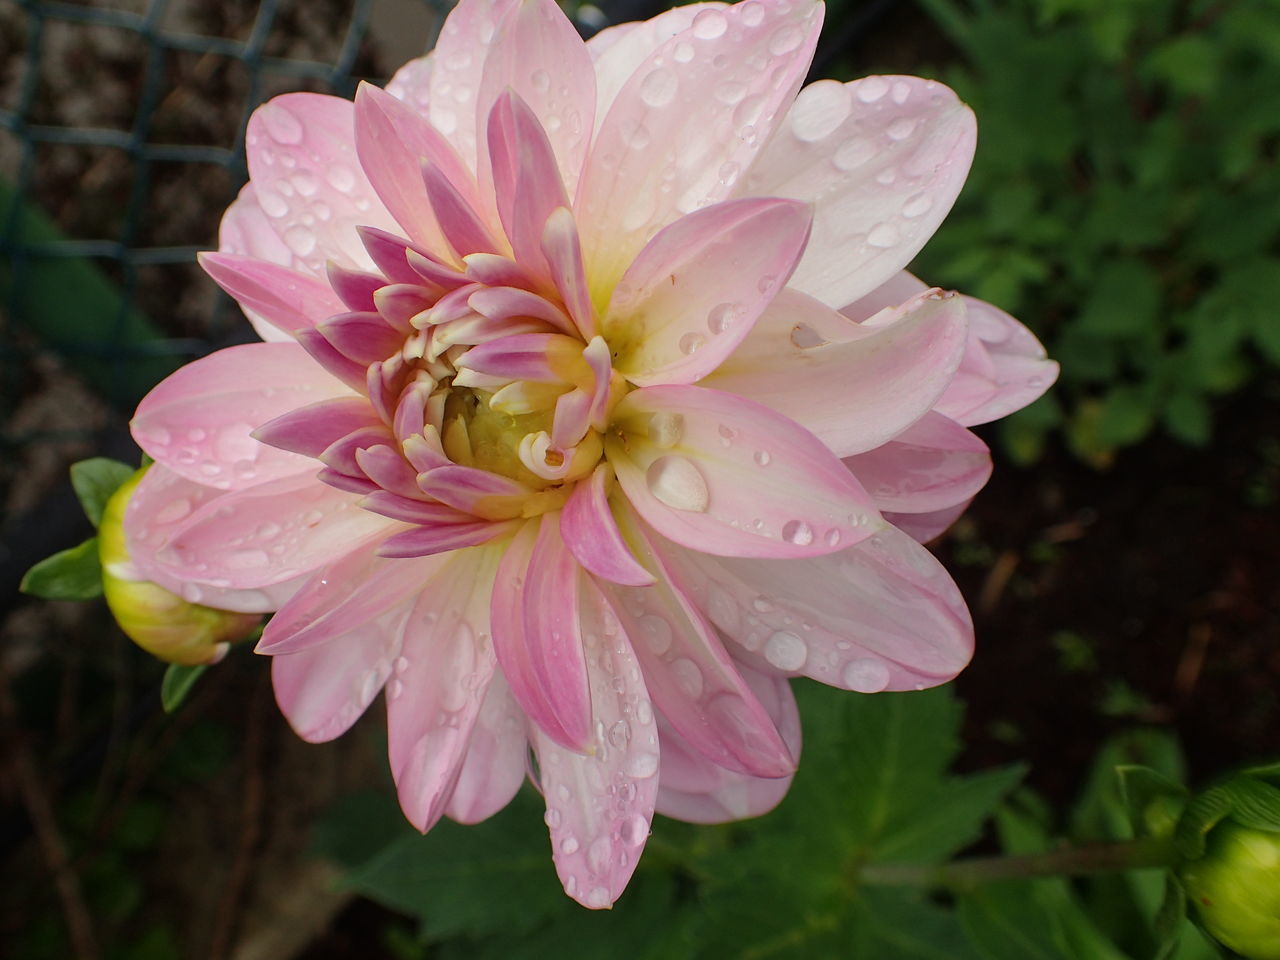 CLOSE-UP OF WET PINK FLOWER